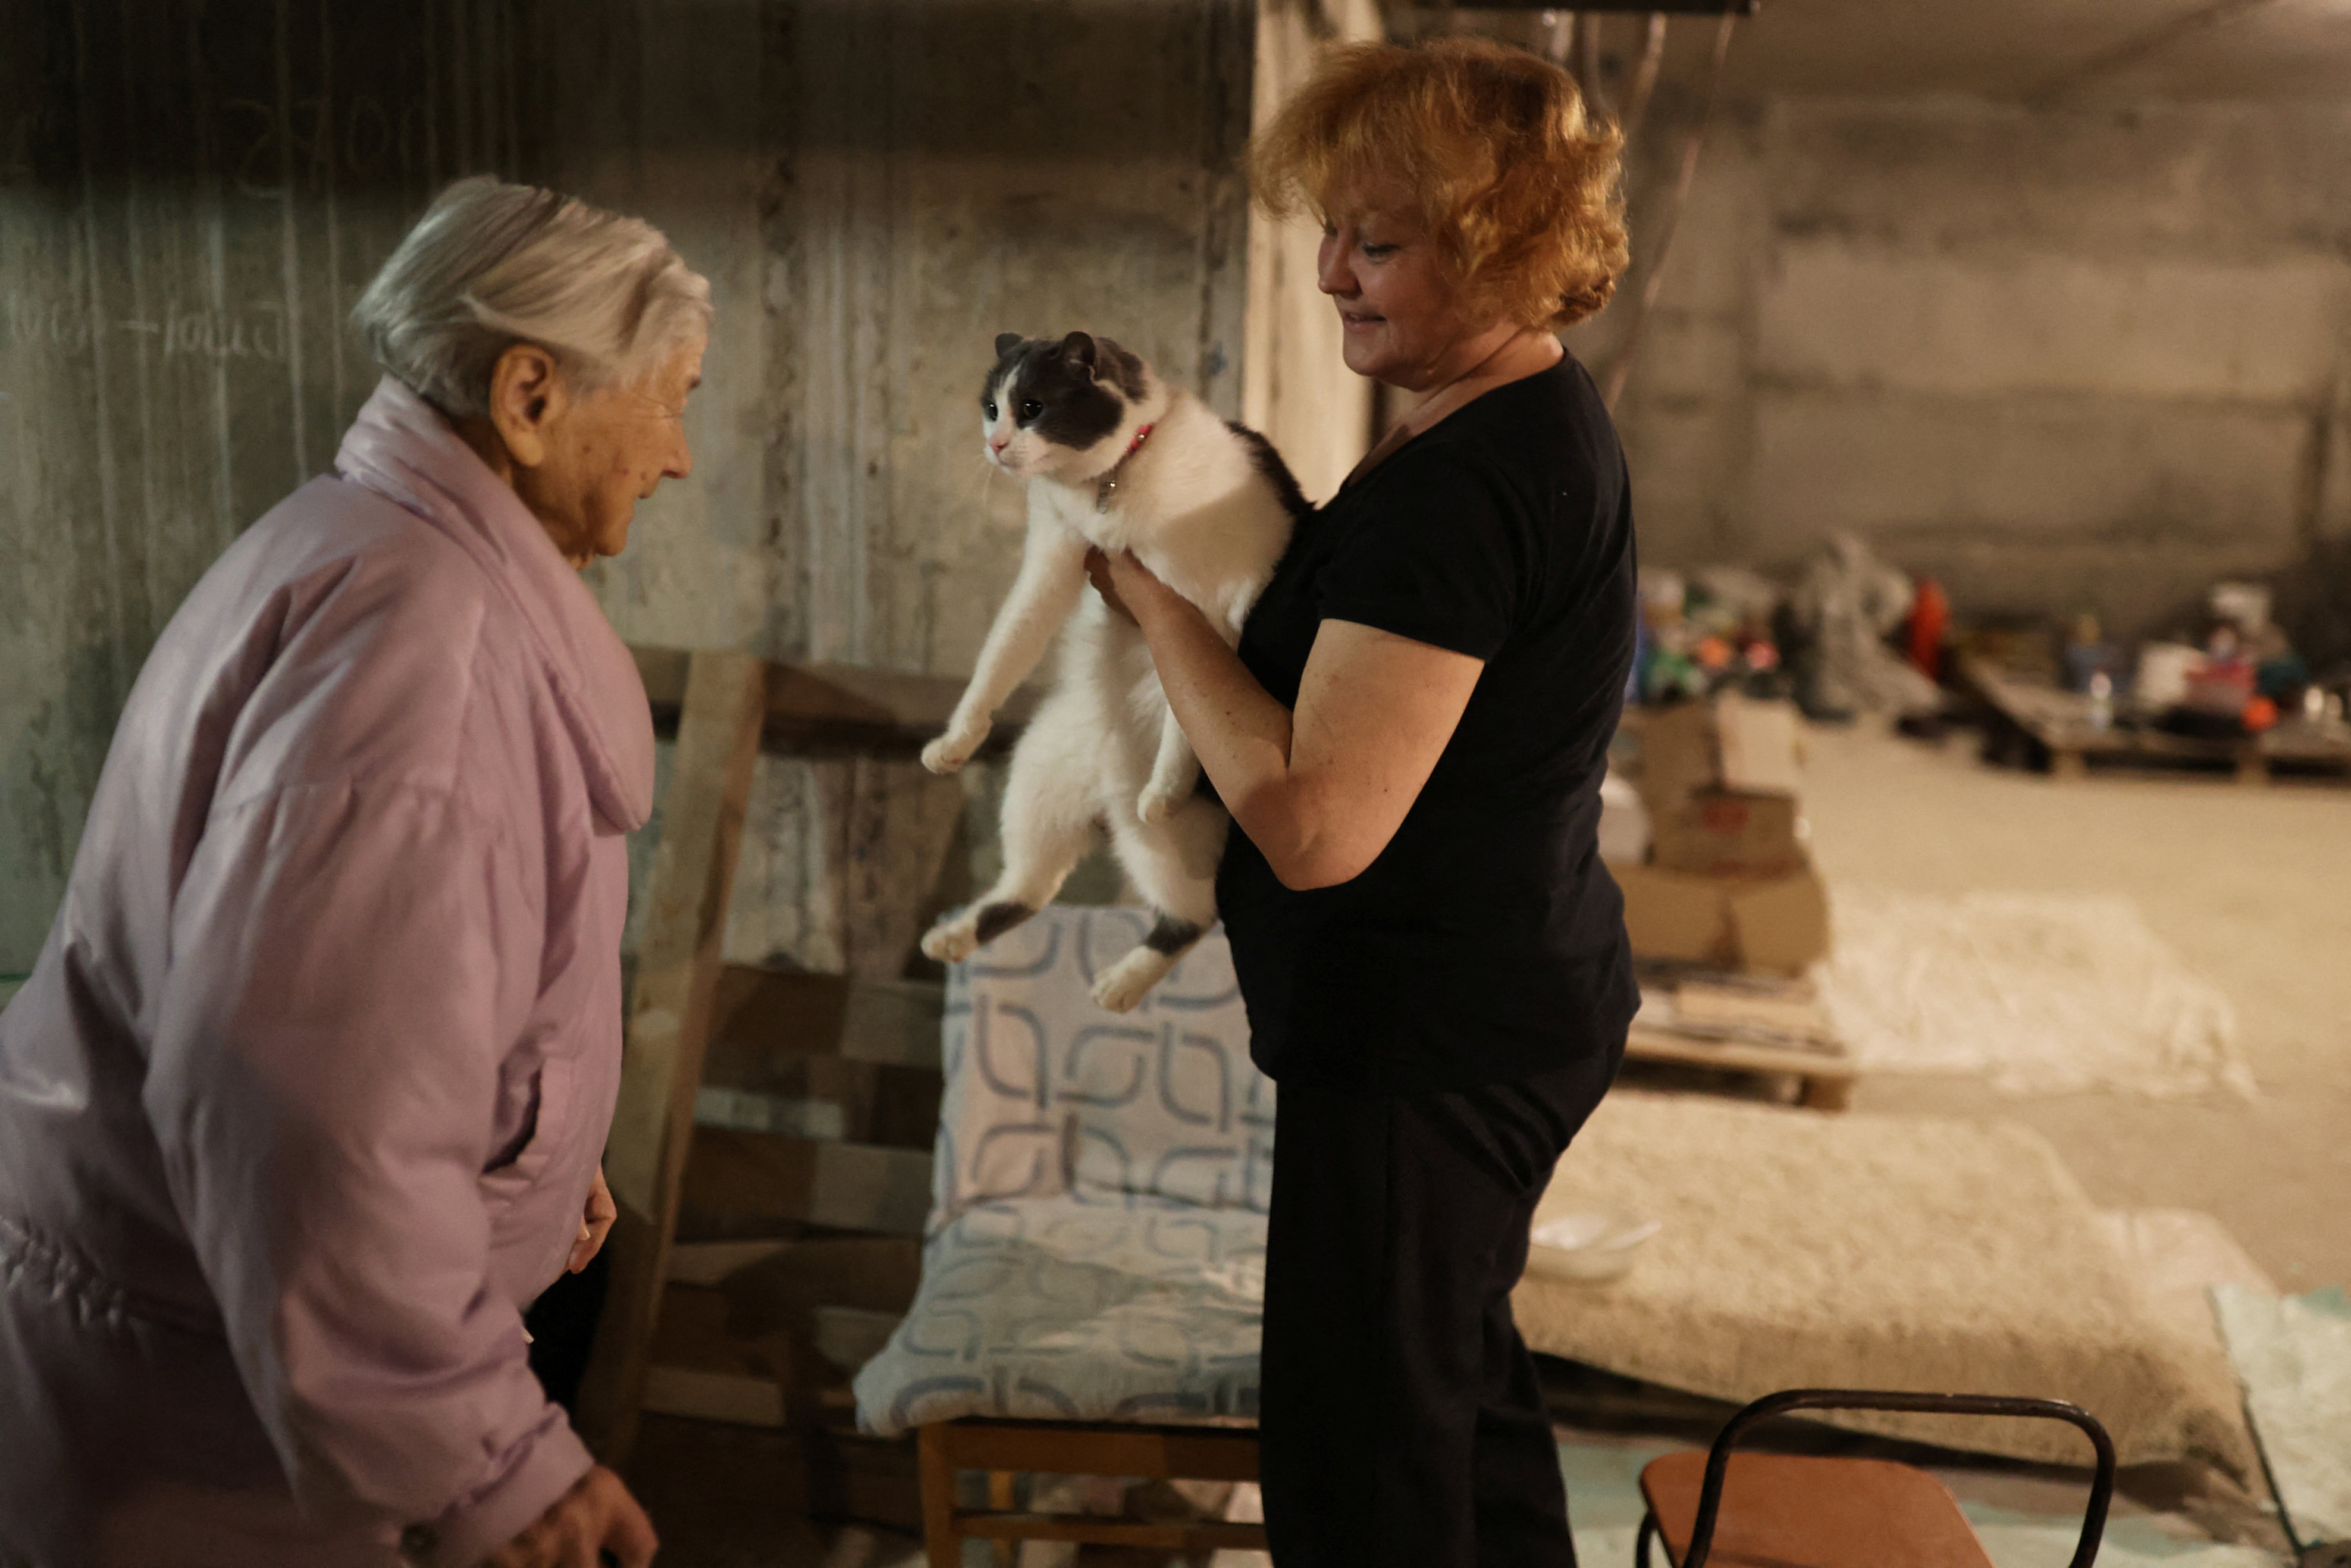 Maria and Natalya talk with the family cat in the basement